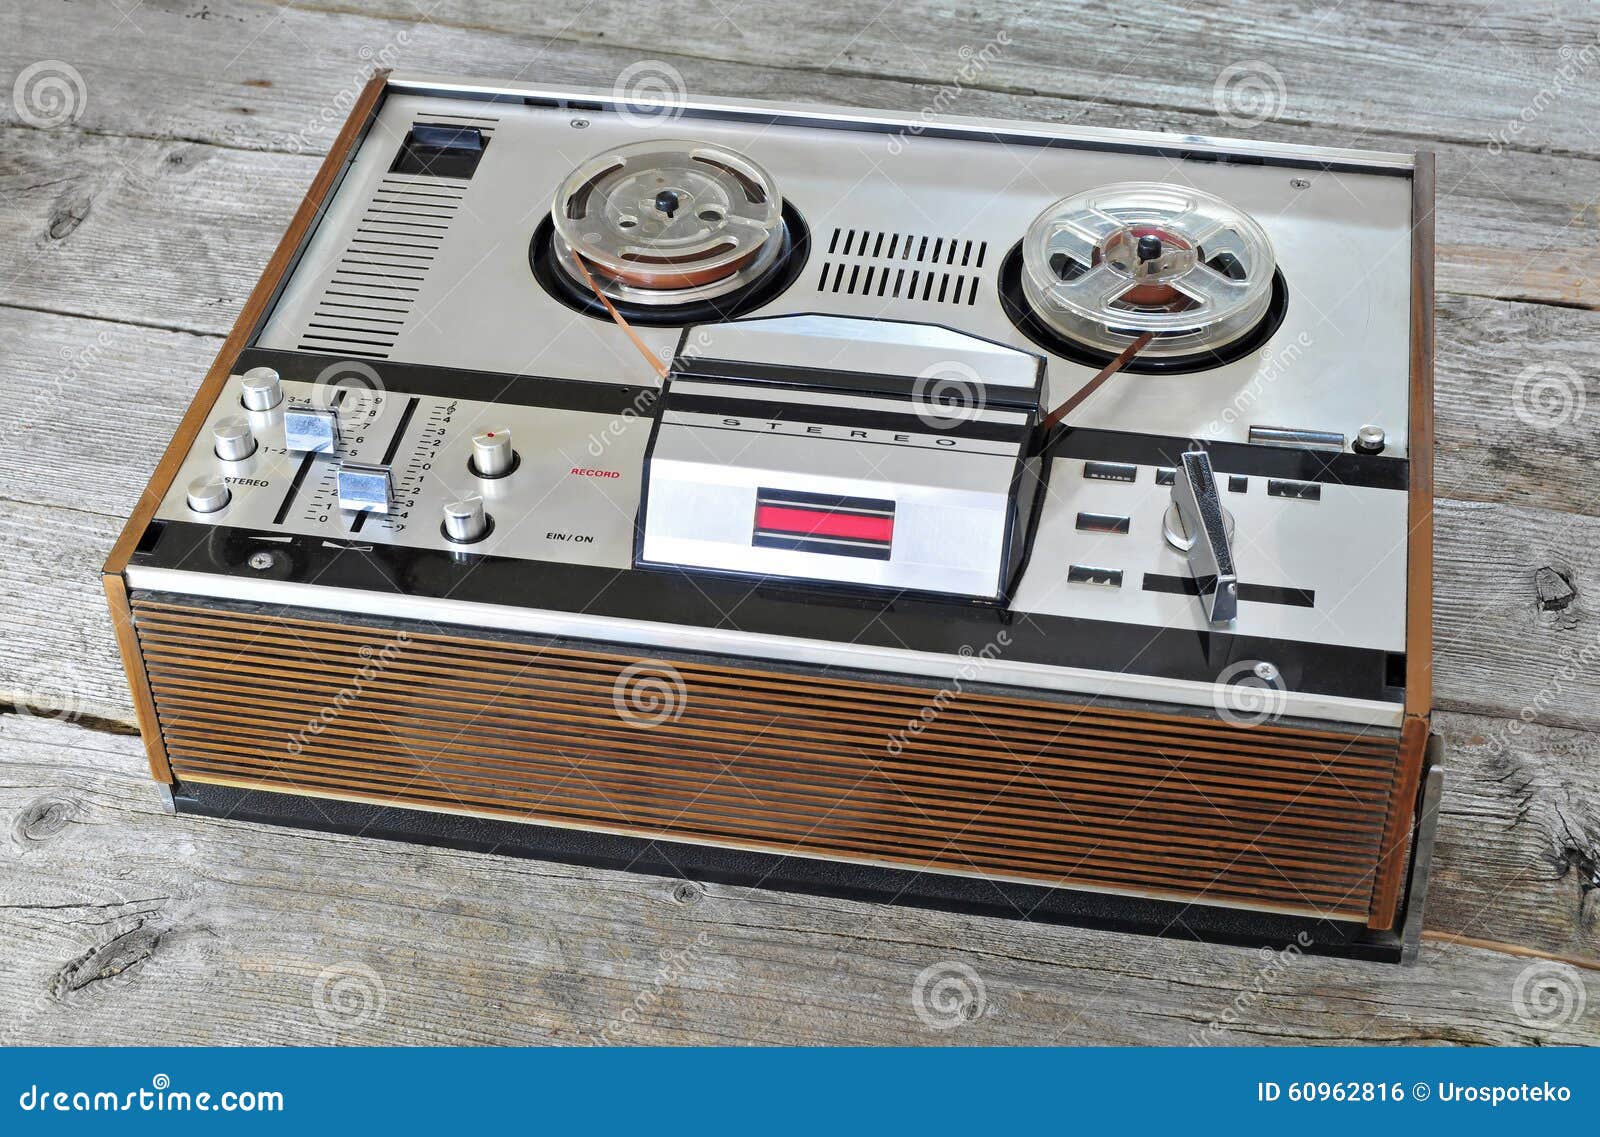 https://thumbs.dreamstime.com/z/old-reel-to-reel-tape-recorder-player-photo-60962816.jpg